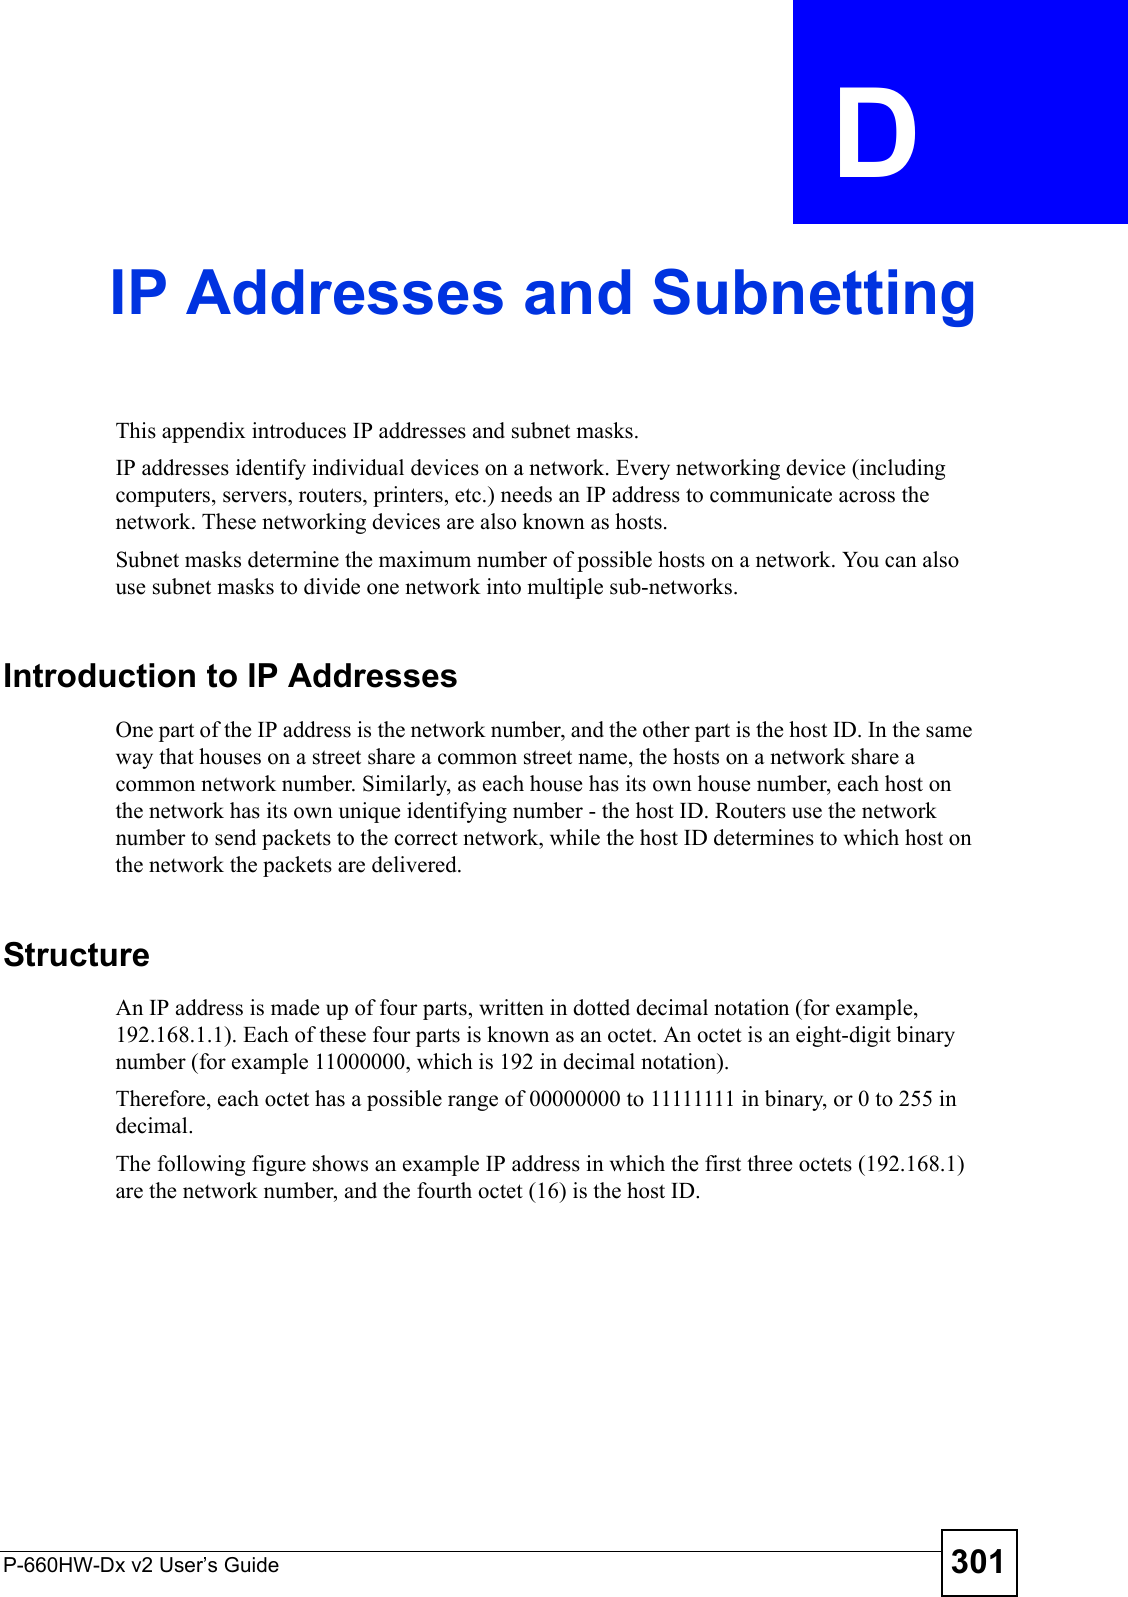 P-660HW-Dx v2 User’s Guide 301APPENDIX  D IP Addresses and SubnettingThis appendix introduces IP addresses and subnet masks. IP addresses identify individual devices on a network. Every networking device (including computers, servers, routers, printers, etc.) needs an IP address to communicate across the network. These networking devices are also known as hosts.Subnet masks determine the maximum number of possible hosts on a network. You can also use subnet masks to divide one network into multiple sub-networks.Introduction to IP AddressesOne part of the IP address is the network number, and the other part is the host ID. In the same way that houses on a street share a common street name, the hosts on a network share a common network number. Similarly, as each house has its own house number, each host on the network has its own unique identifying number - the host ID. Routers use the network number to send packets to the correct network, while the host ID determines to which host on the network the packets are delivered.StructureAn IP address is made up of four parts, written in dotted decimal notation (for example, 192.168.1.1). Each of these four parts is known as an octet. An octet is an eight-digit binary number (for example 11000000, which is 192 in decimal notation). Therefore, each octet has a possible range of 00000000 to 11111111 in binary, or 0 to 255 in decimal.The following figure shows an example IP address in which the first three octets (192.168.1) are the network number, and the fourth octet (16) is the host ID.